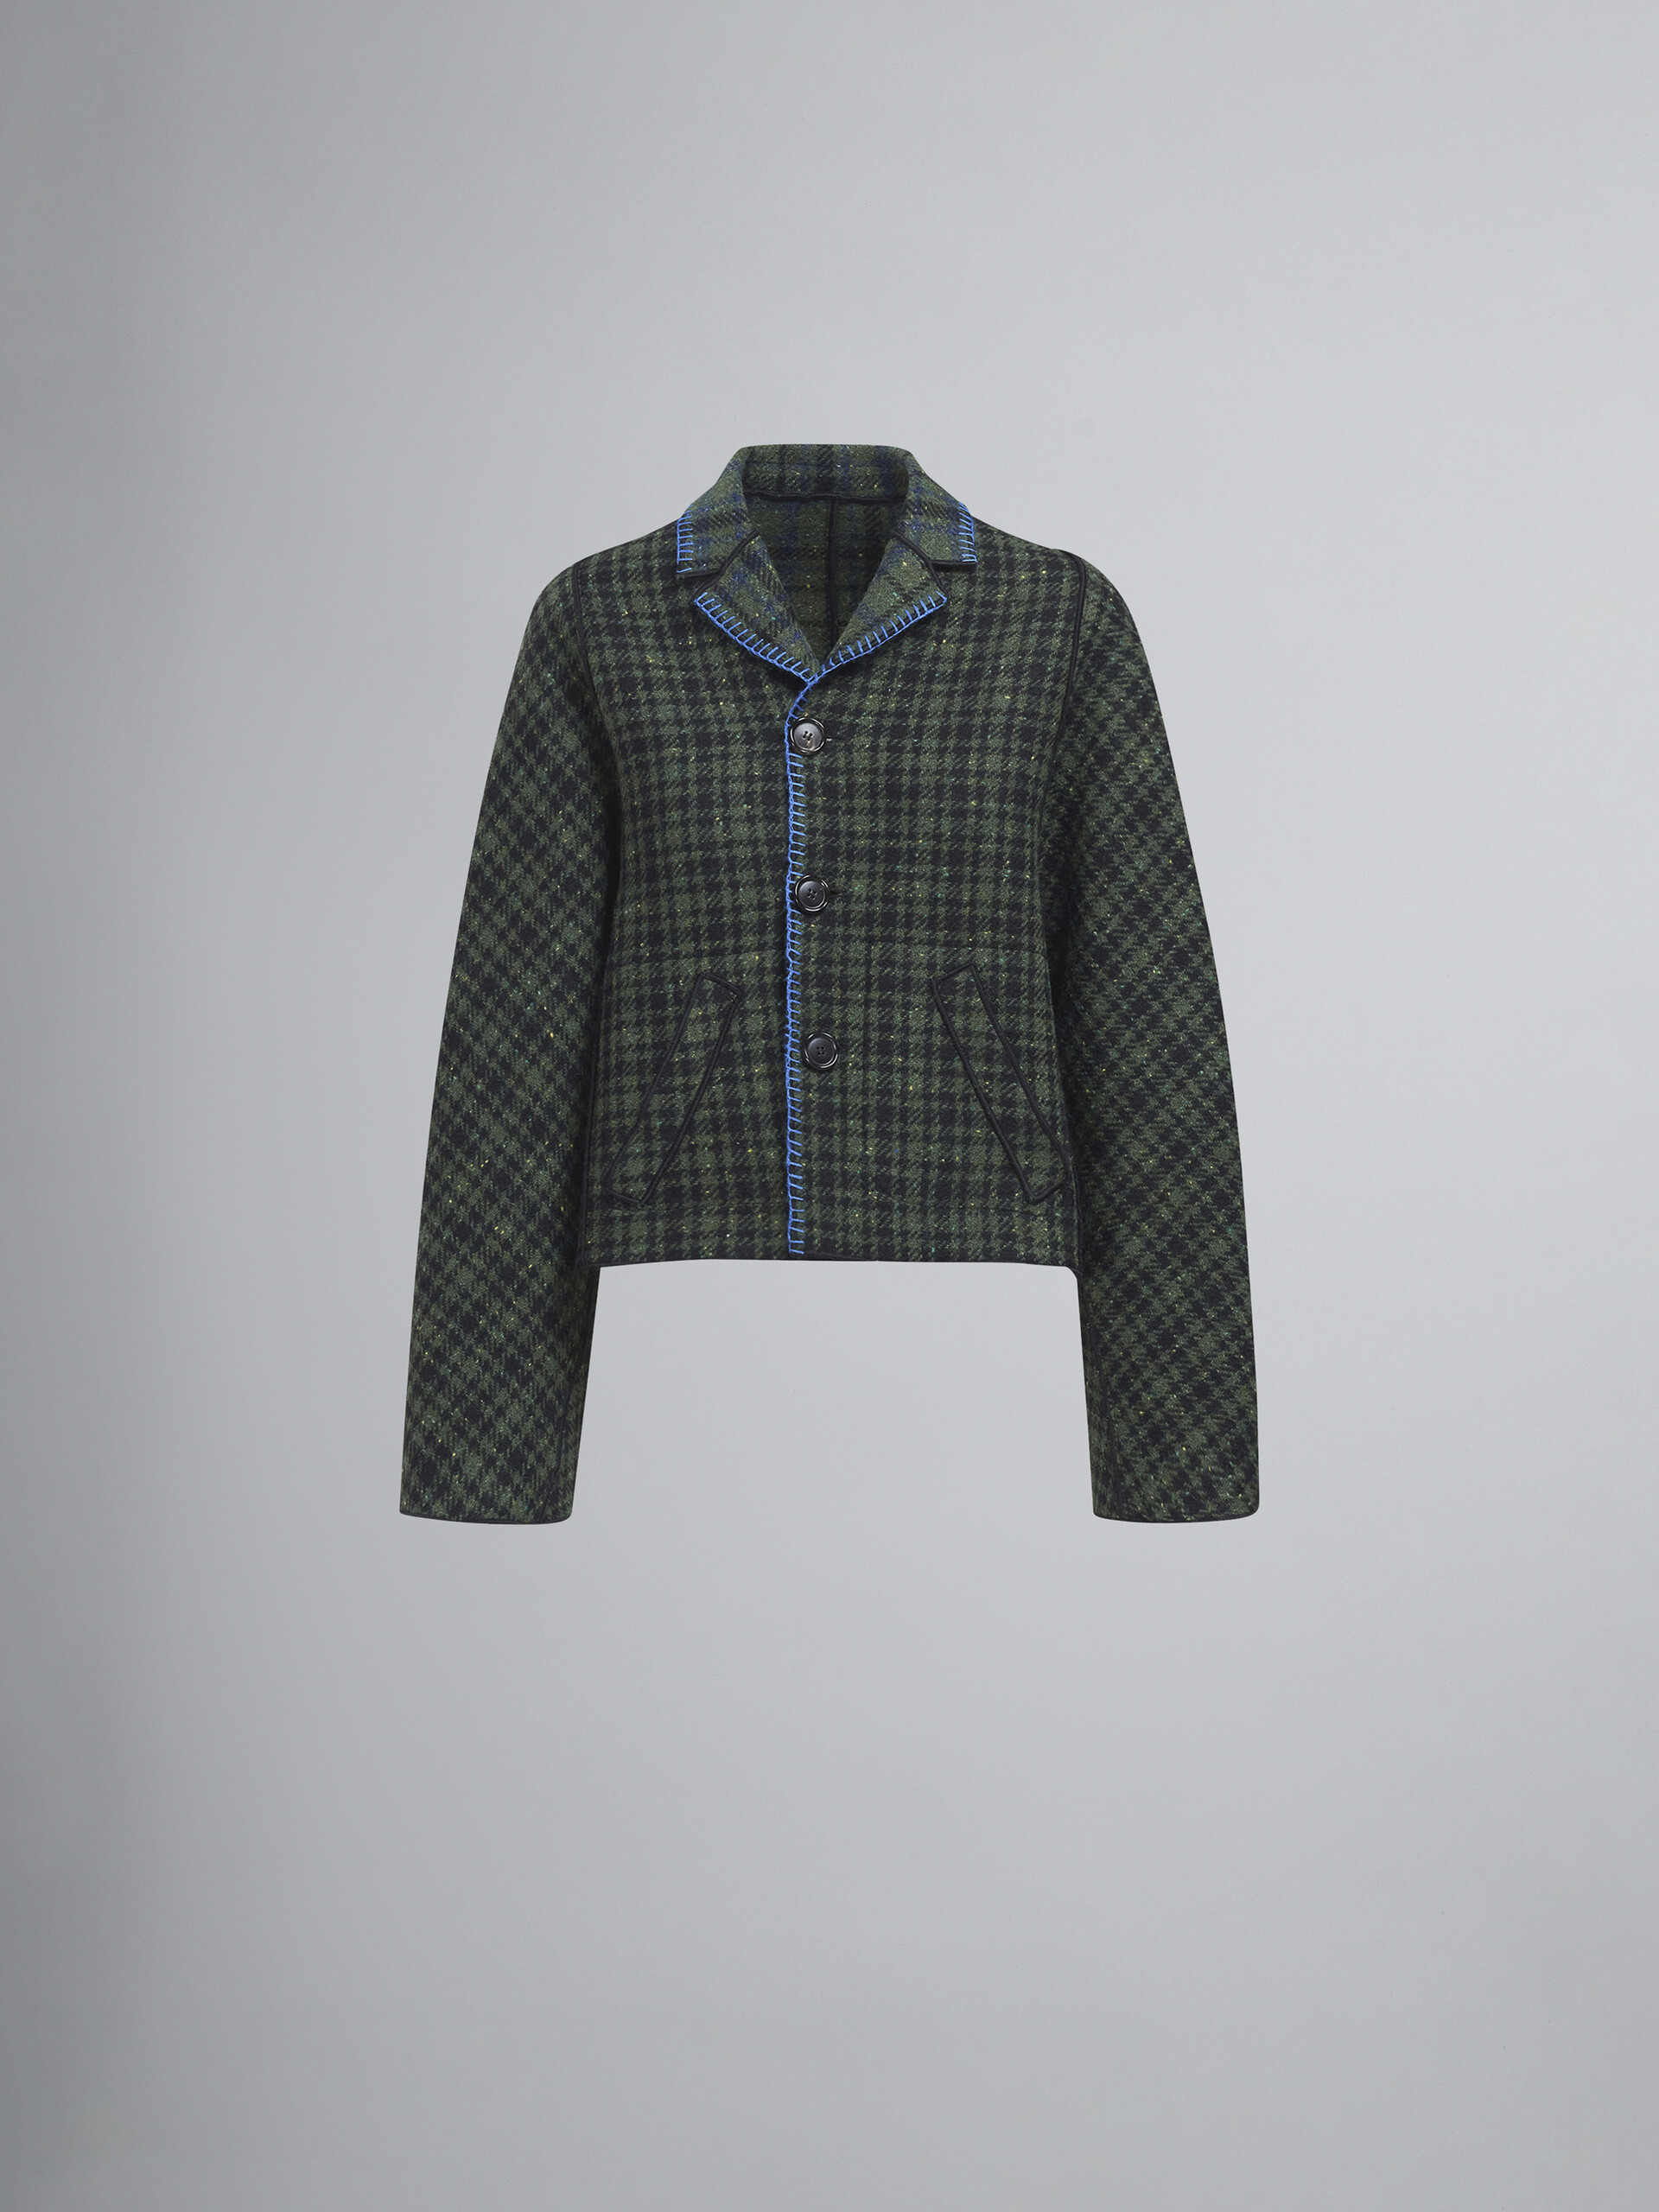 Double-faced check wool jacket - Jackets - Image 1